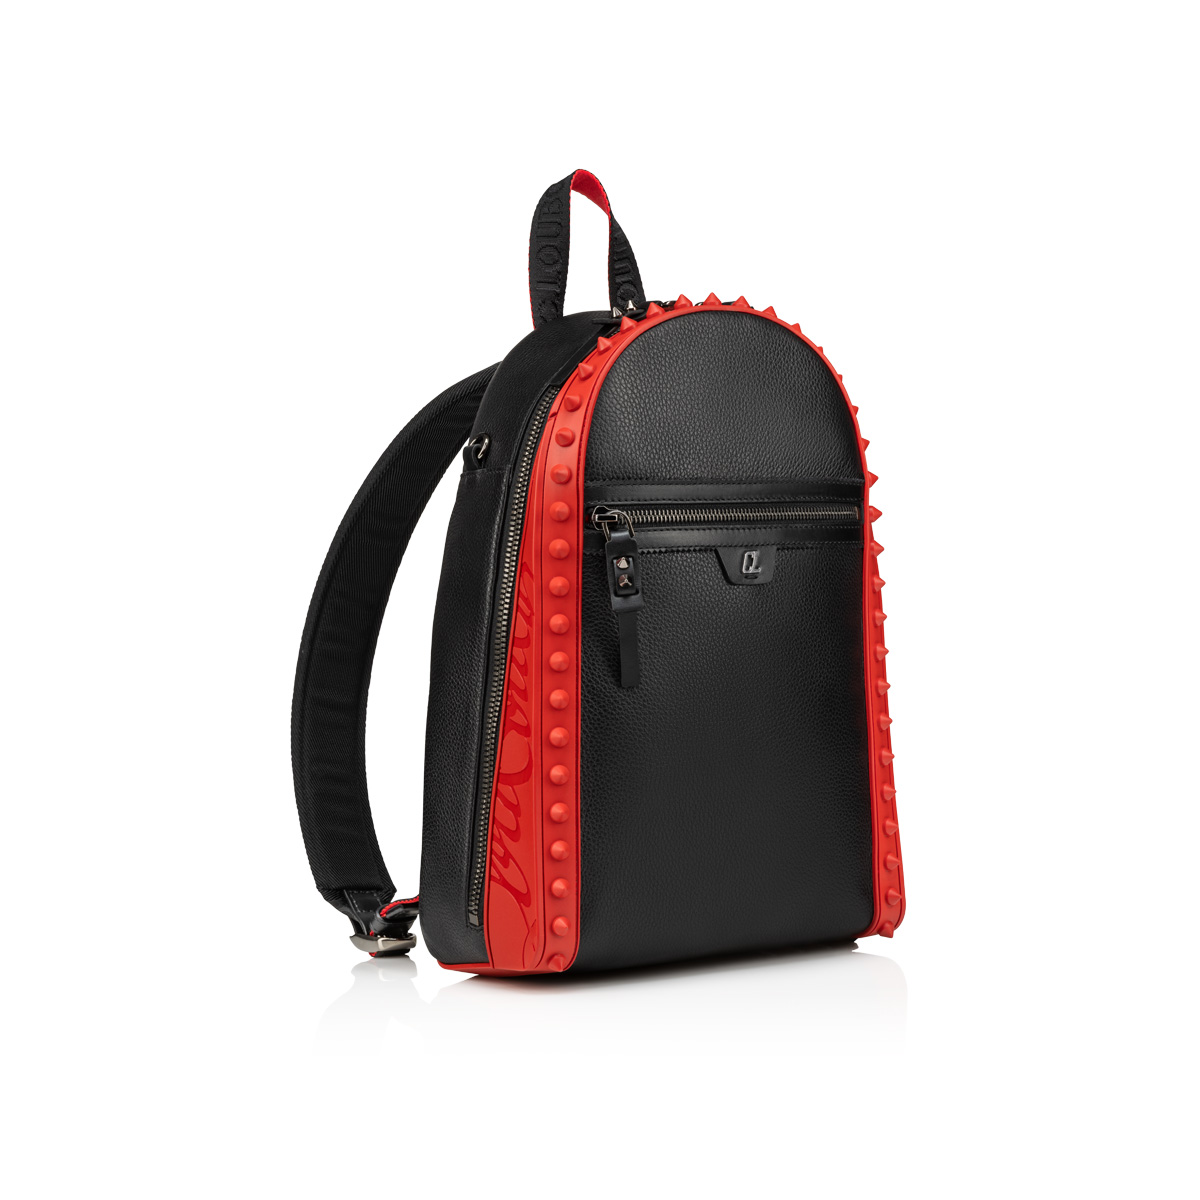 Christian Louboutin Men's Backparis Embossed Leather Backpack